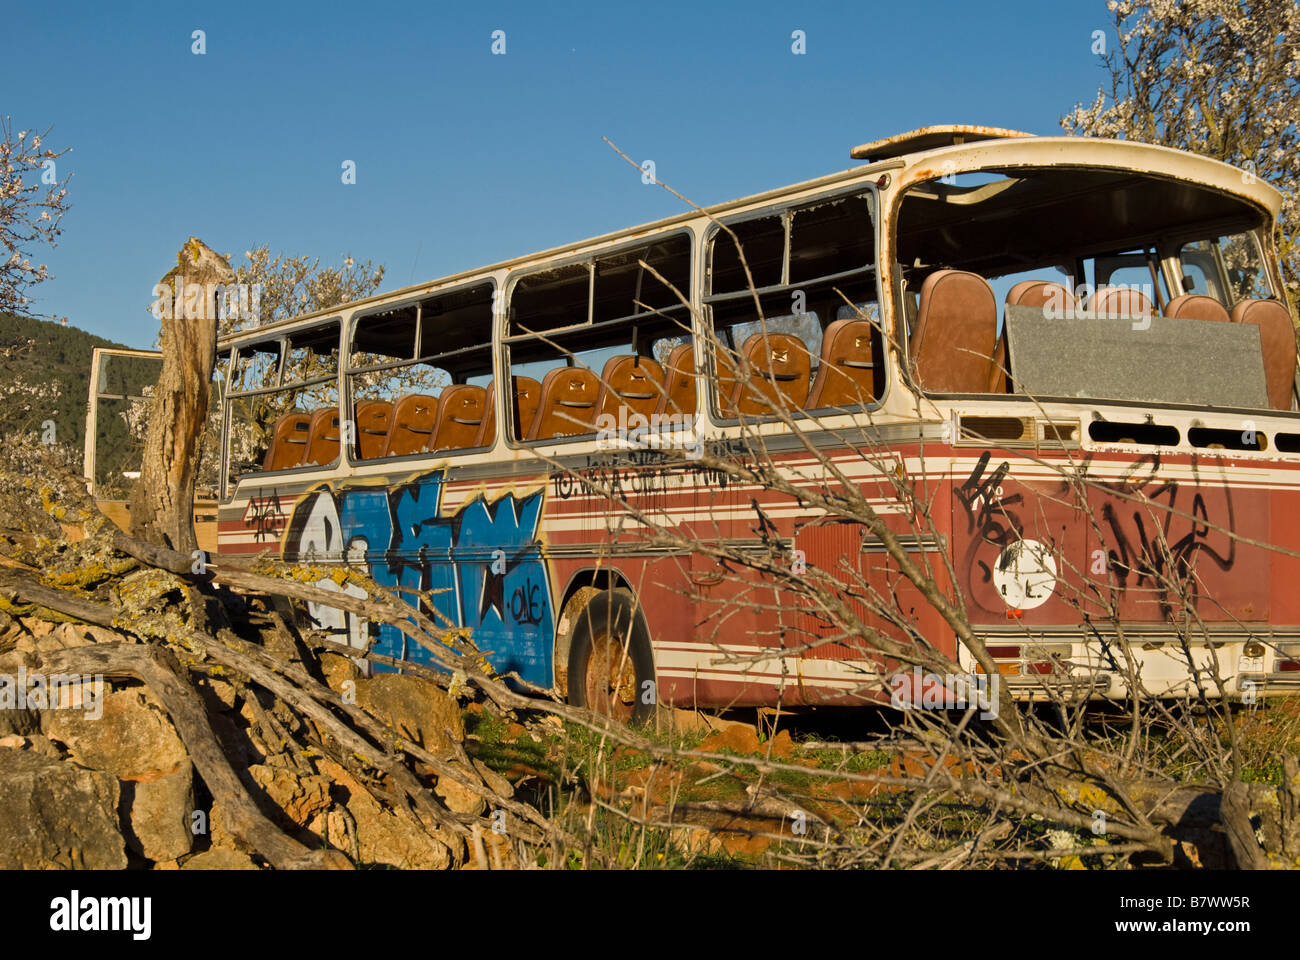 Abandoned bus on an almond tree field Stock Photo